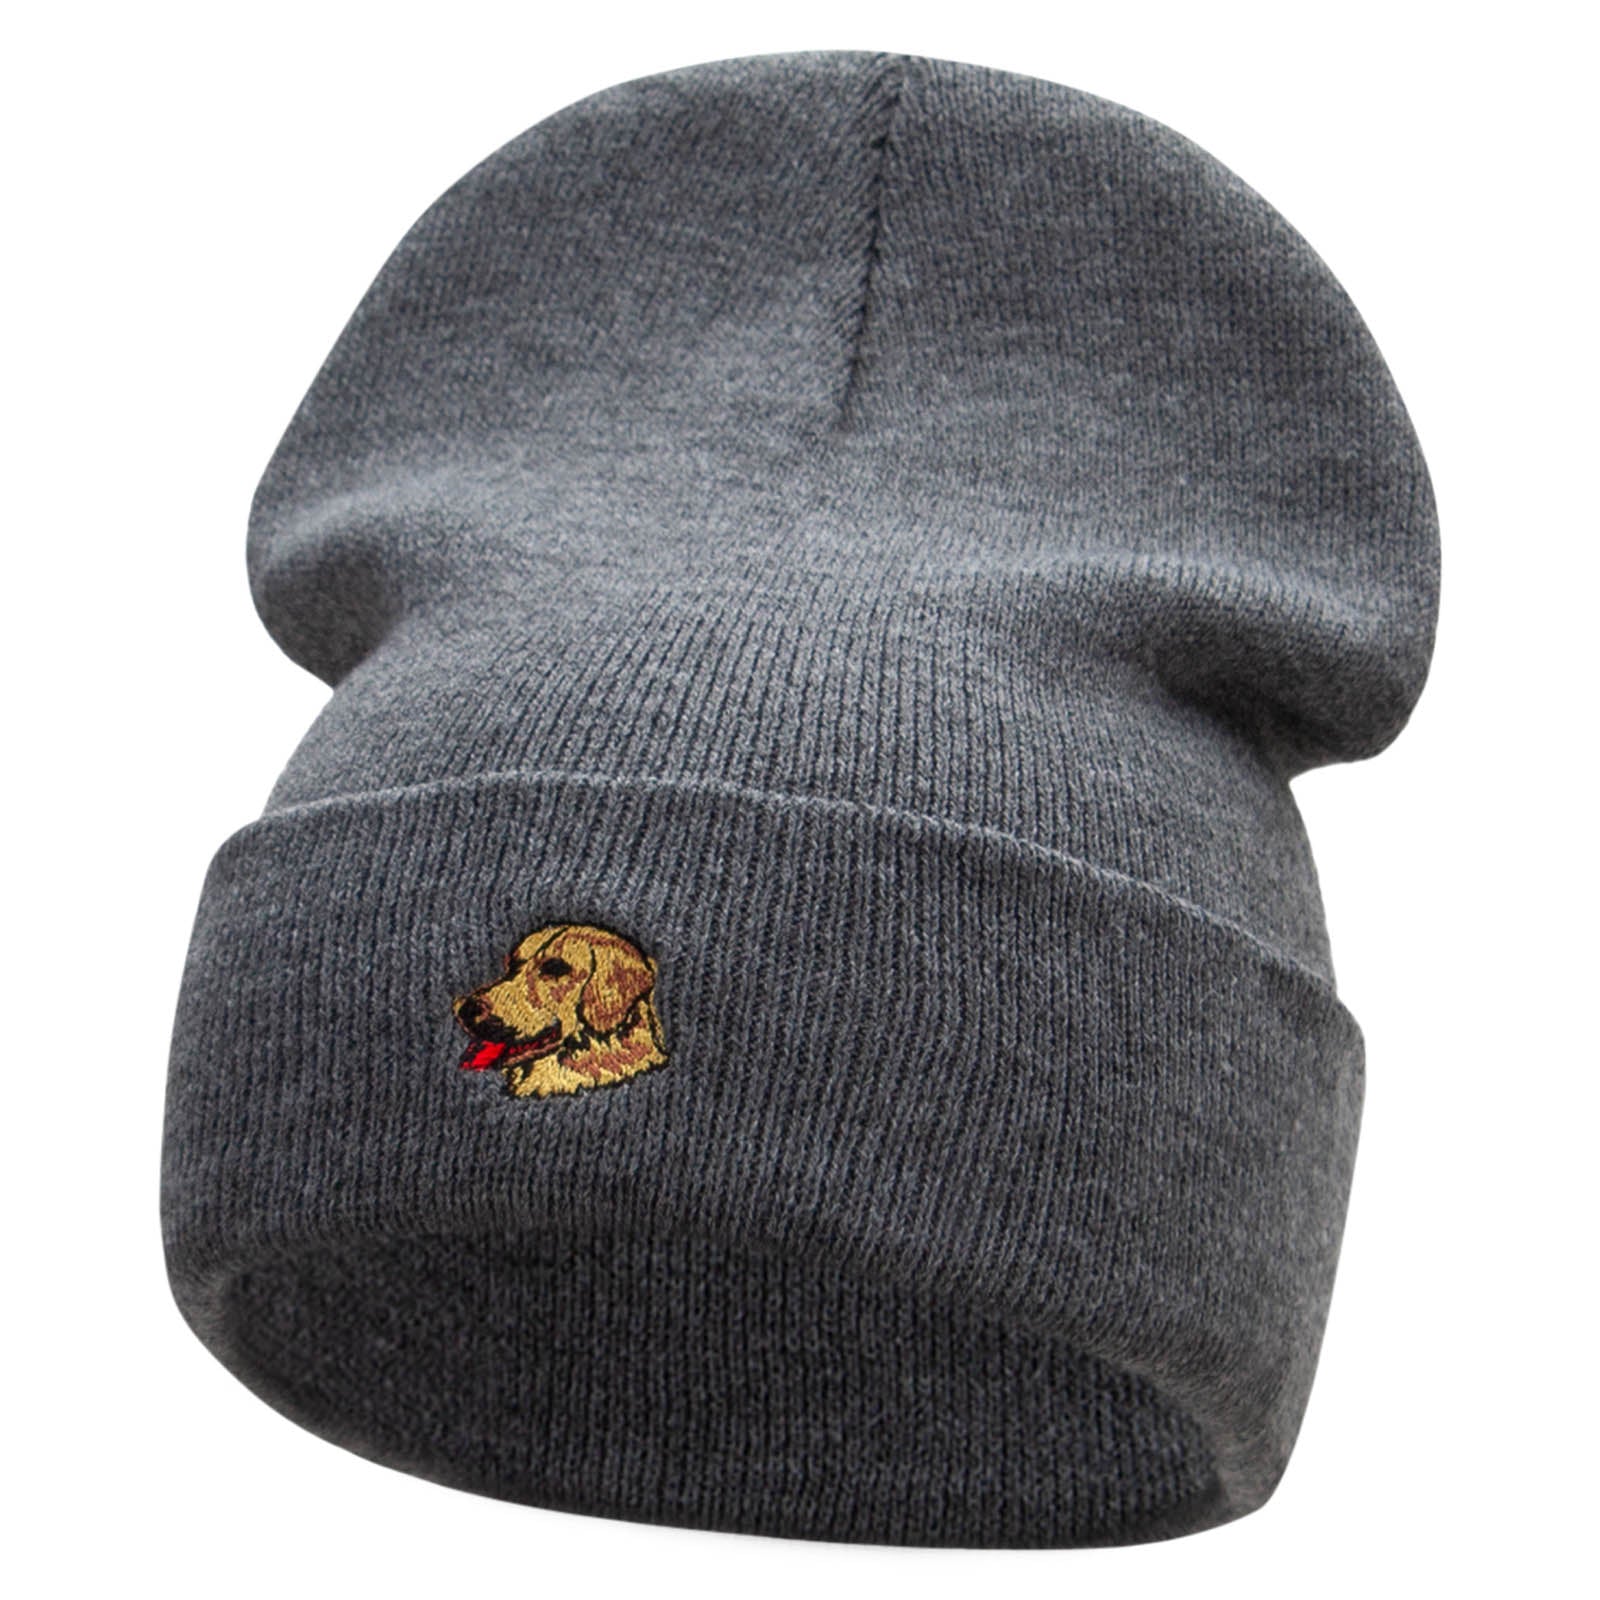 Golden Retriever Head Embroidered Long Knitted Beanie - Heather Charcoal OSFM